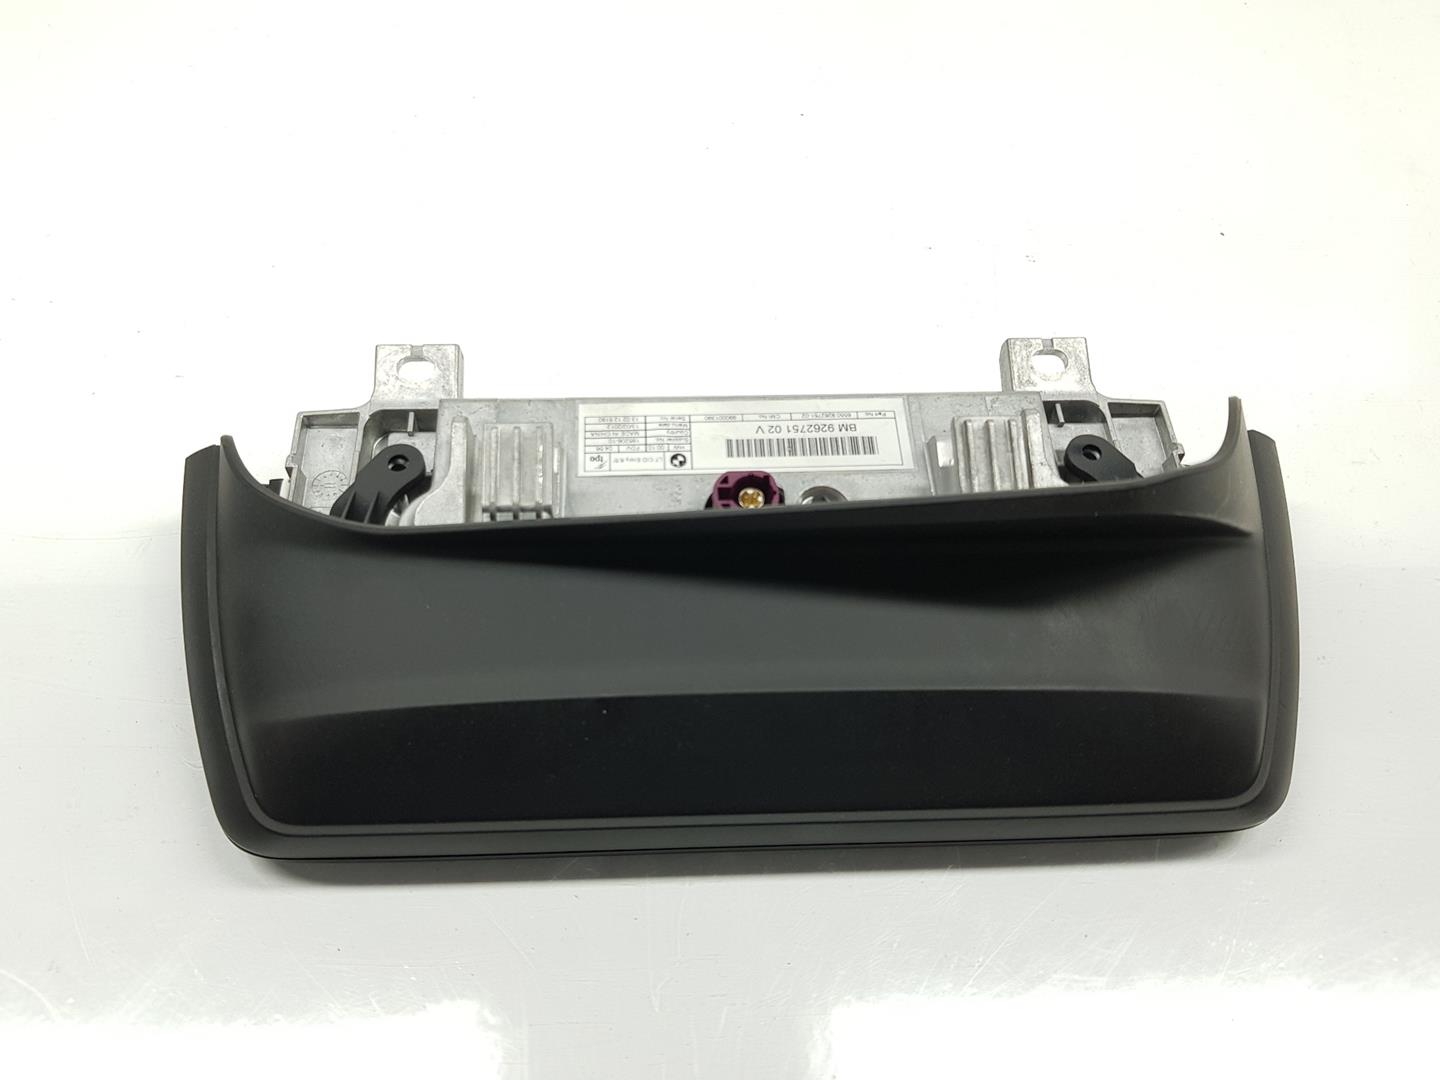 BMW 1 Series F20/F21 (2011-2020) Other Interior Parts 9262751, 65509270391 23750140